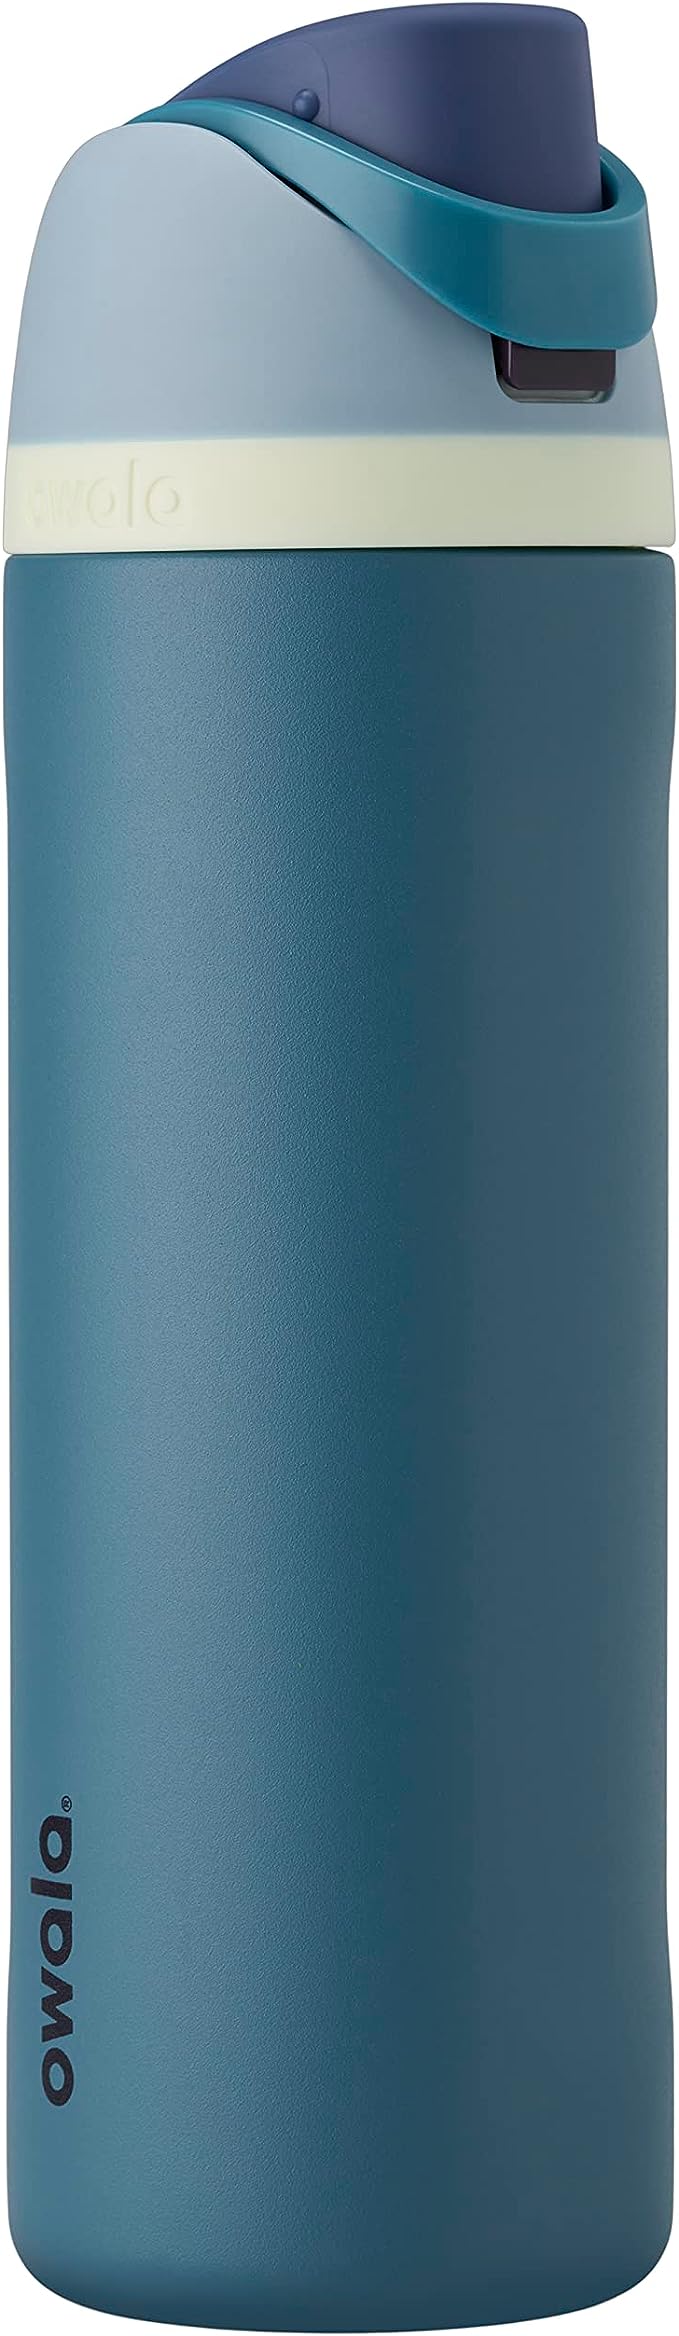 Owala FreeSip Insulated Stainless Steel Water Bottle with Straw for Sports and Travel, BPA-Free, 24-oz, Blue/Teal (Denim)